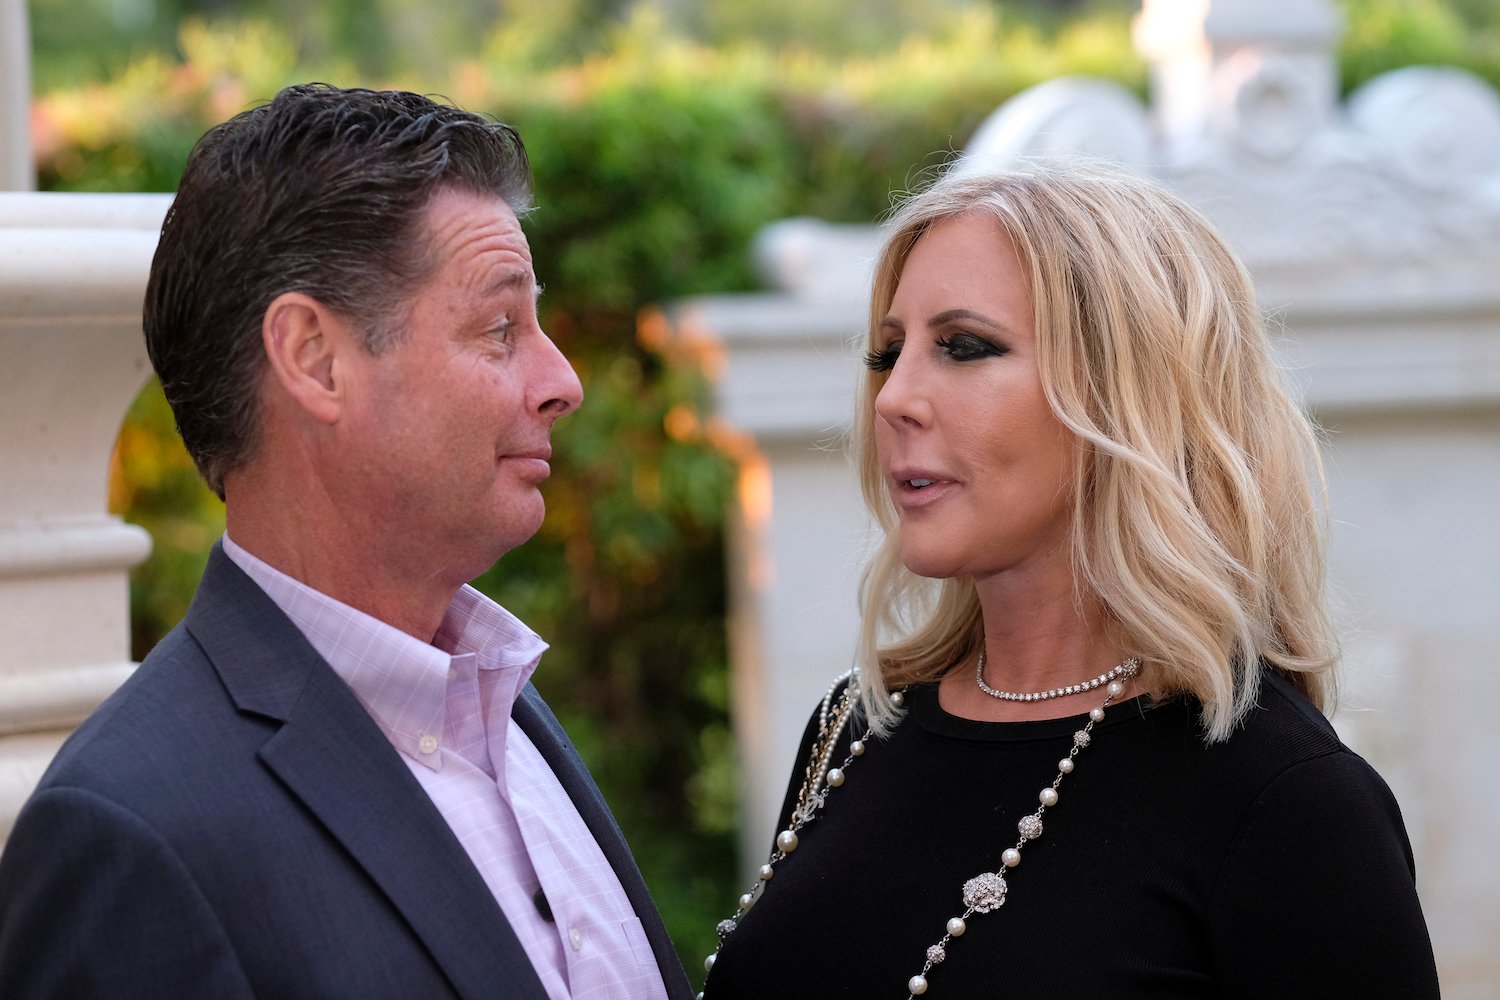 Steve Lodge looking at Vicki Gunvalson in a scene from 'RHOC'